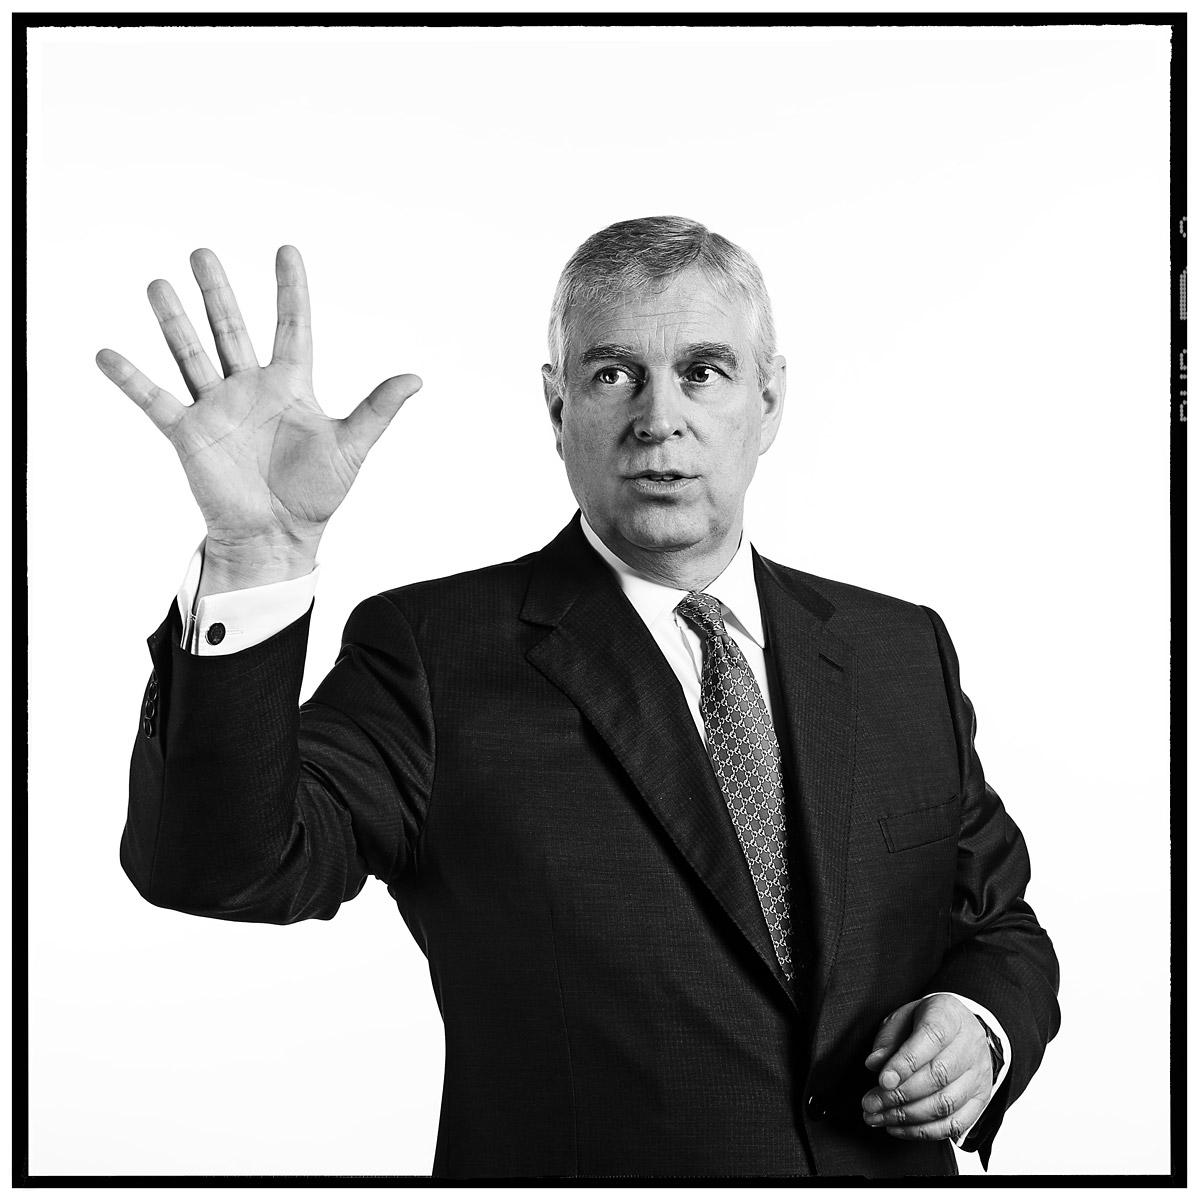 Photograph of HRH Prince Andrew by Contemporary portrait photographer Julian Hanford